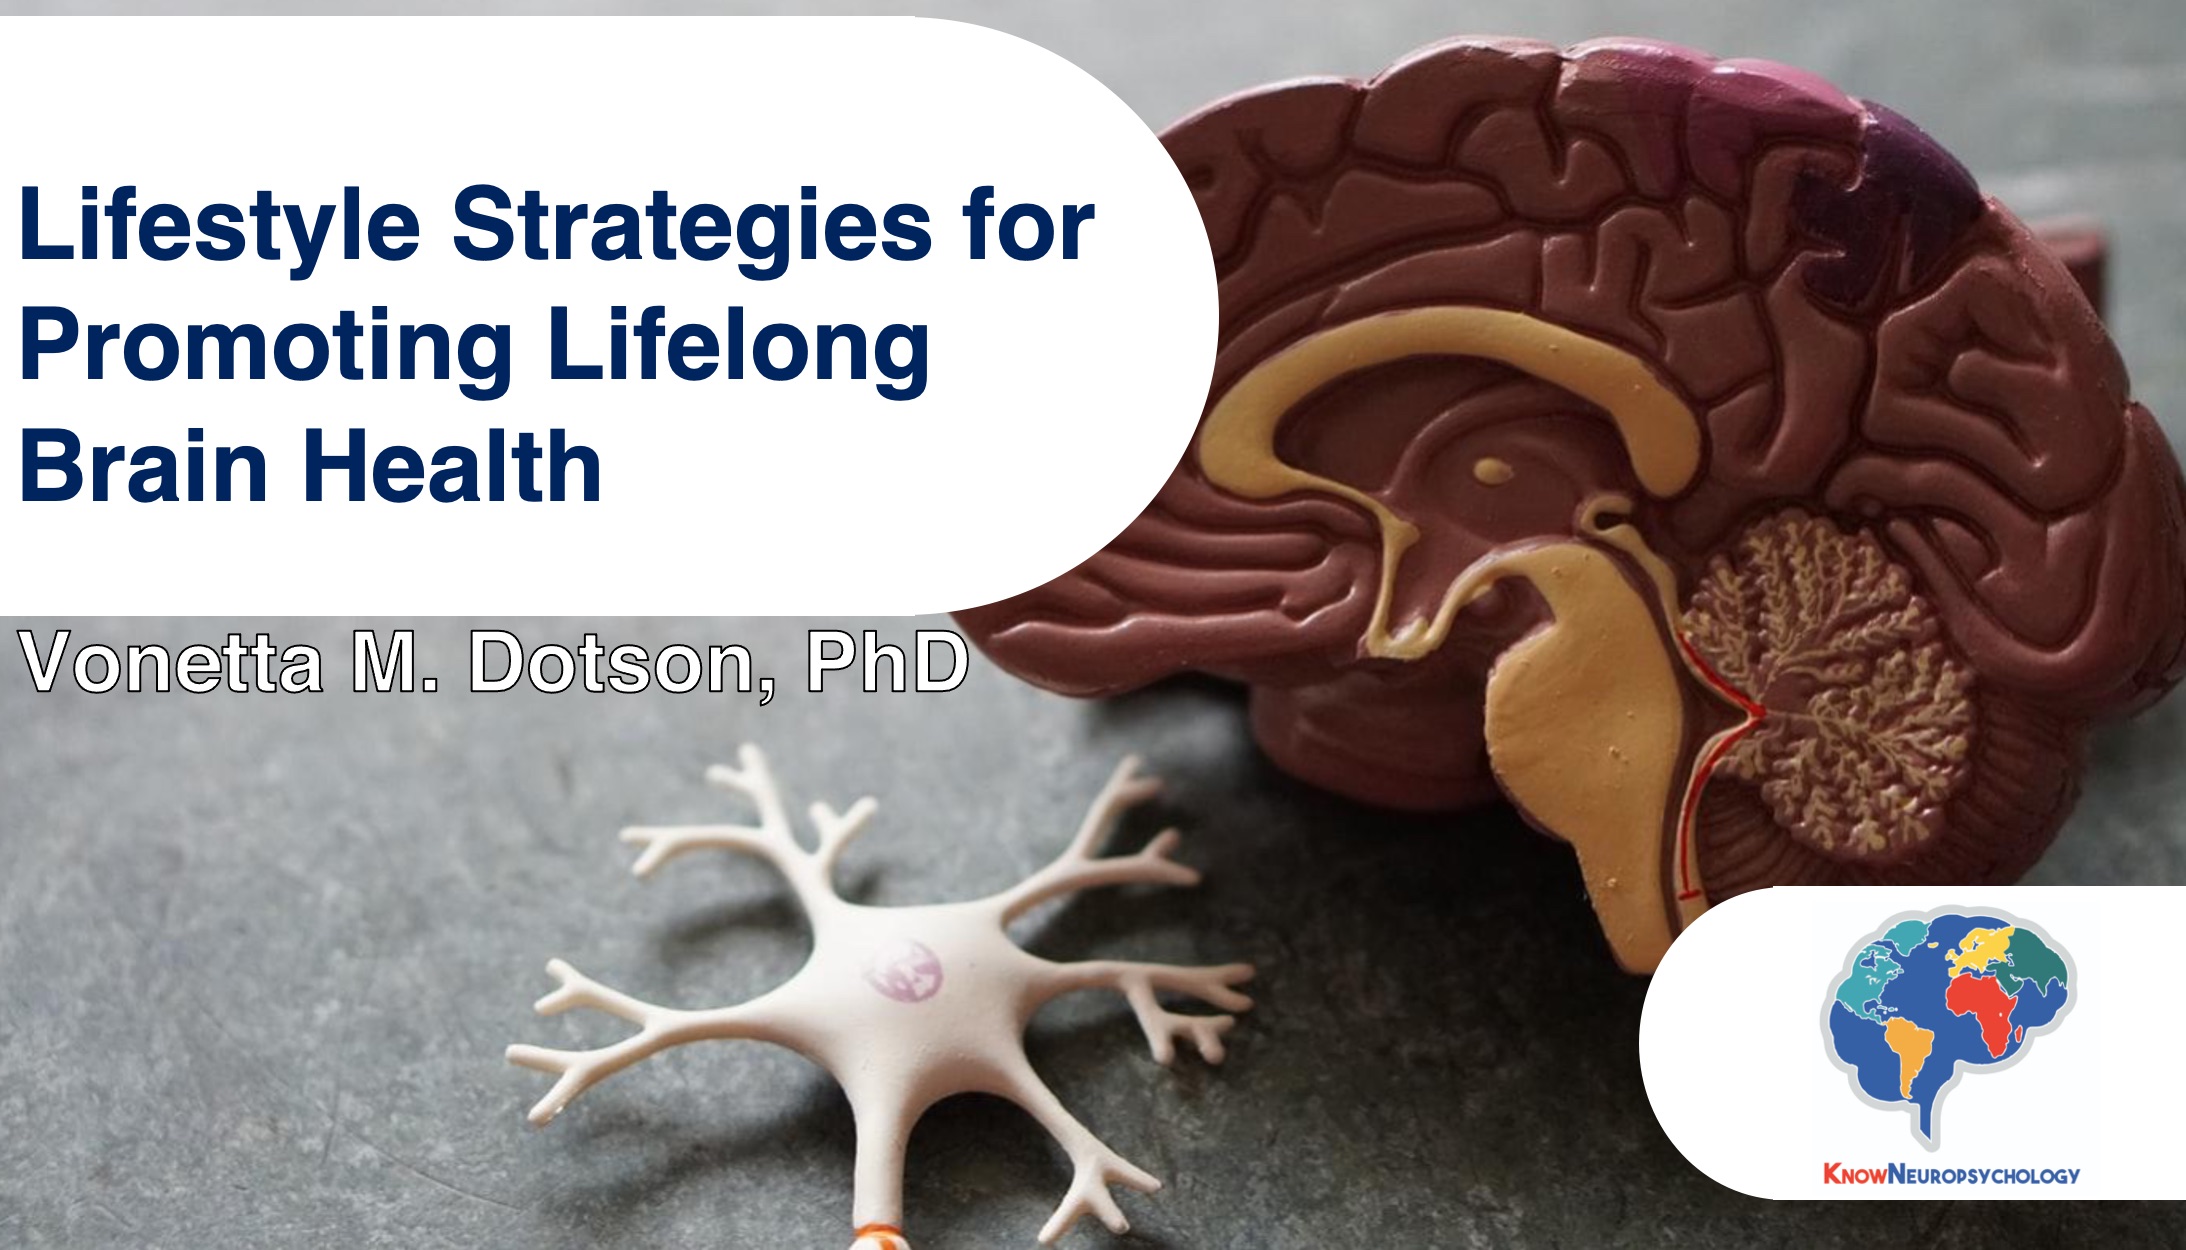 Lifestyle Strategies for Promoting Lifelong Brain Health with Dr. Vonetta Dotson